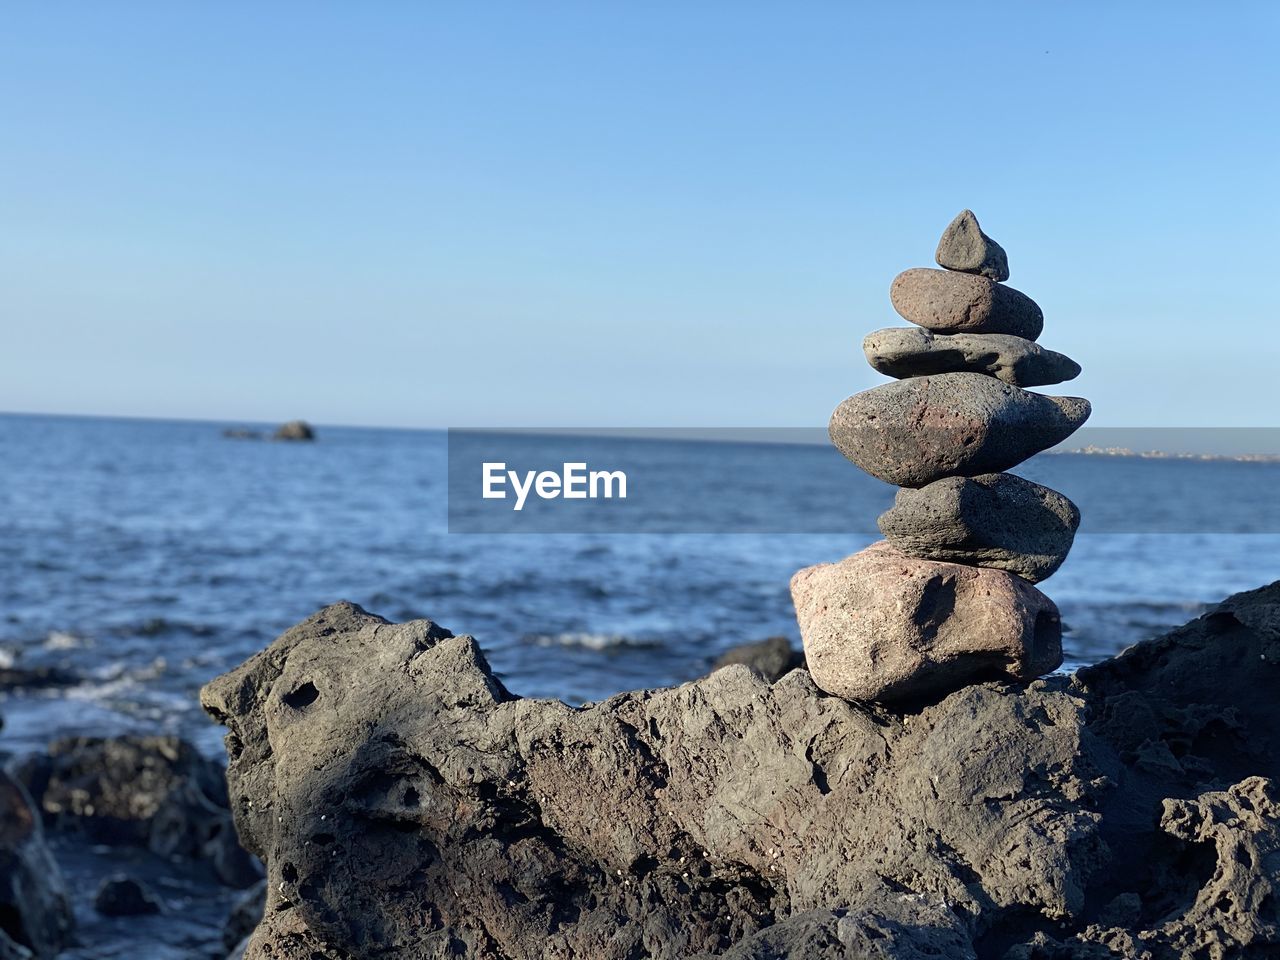 STACK OF ROCKS ON SHORE AGAINST SEA